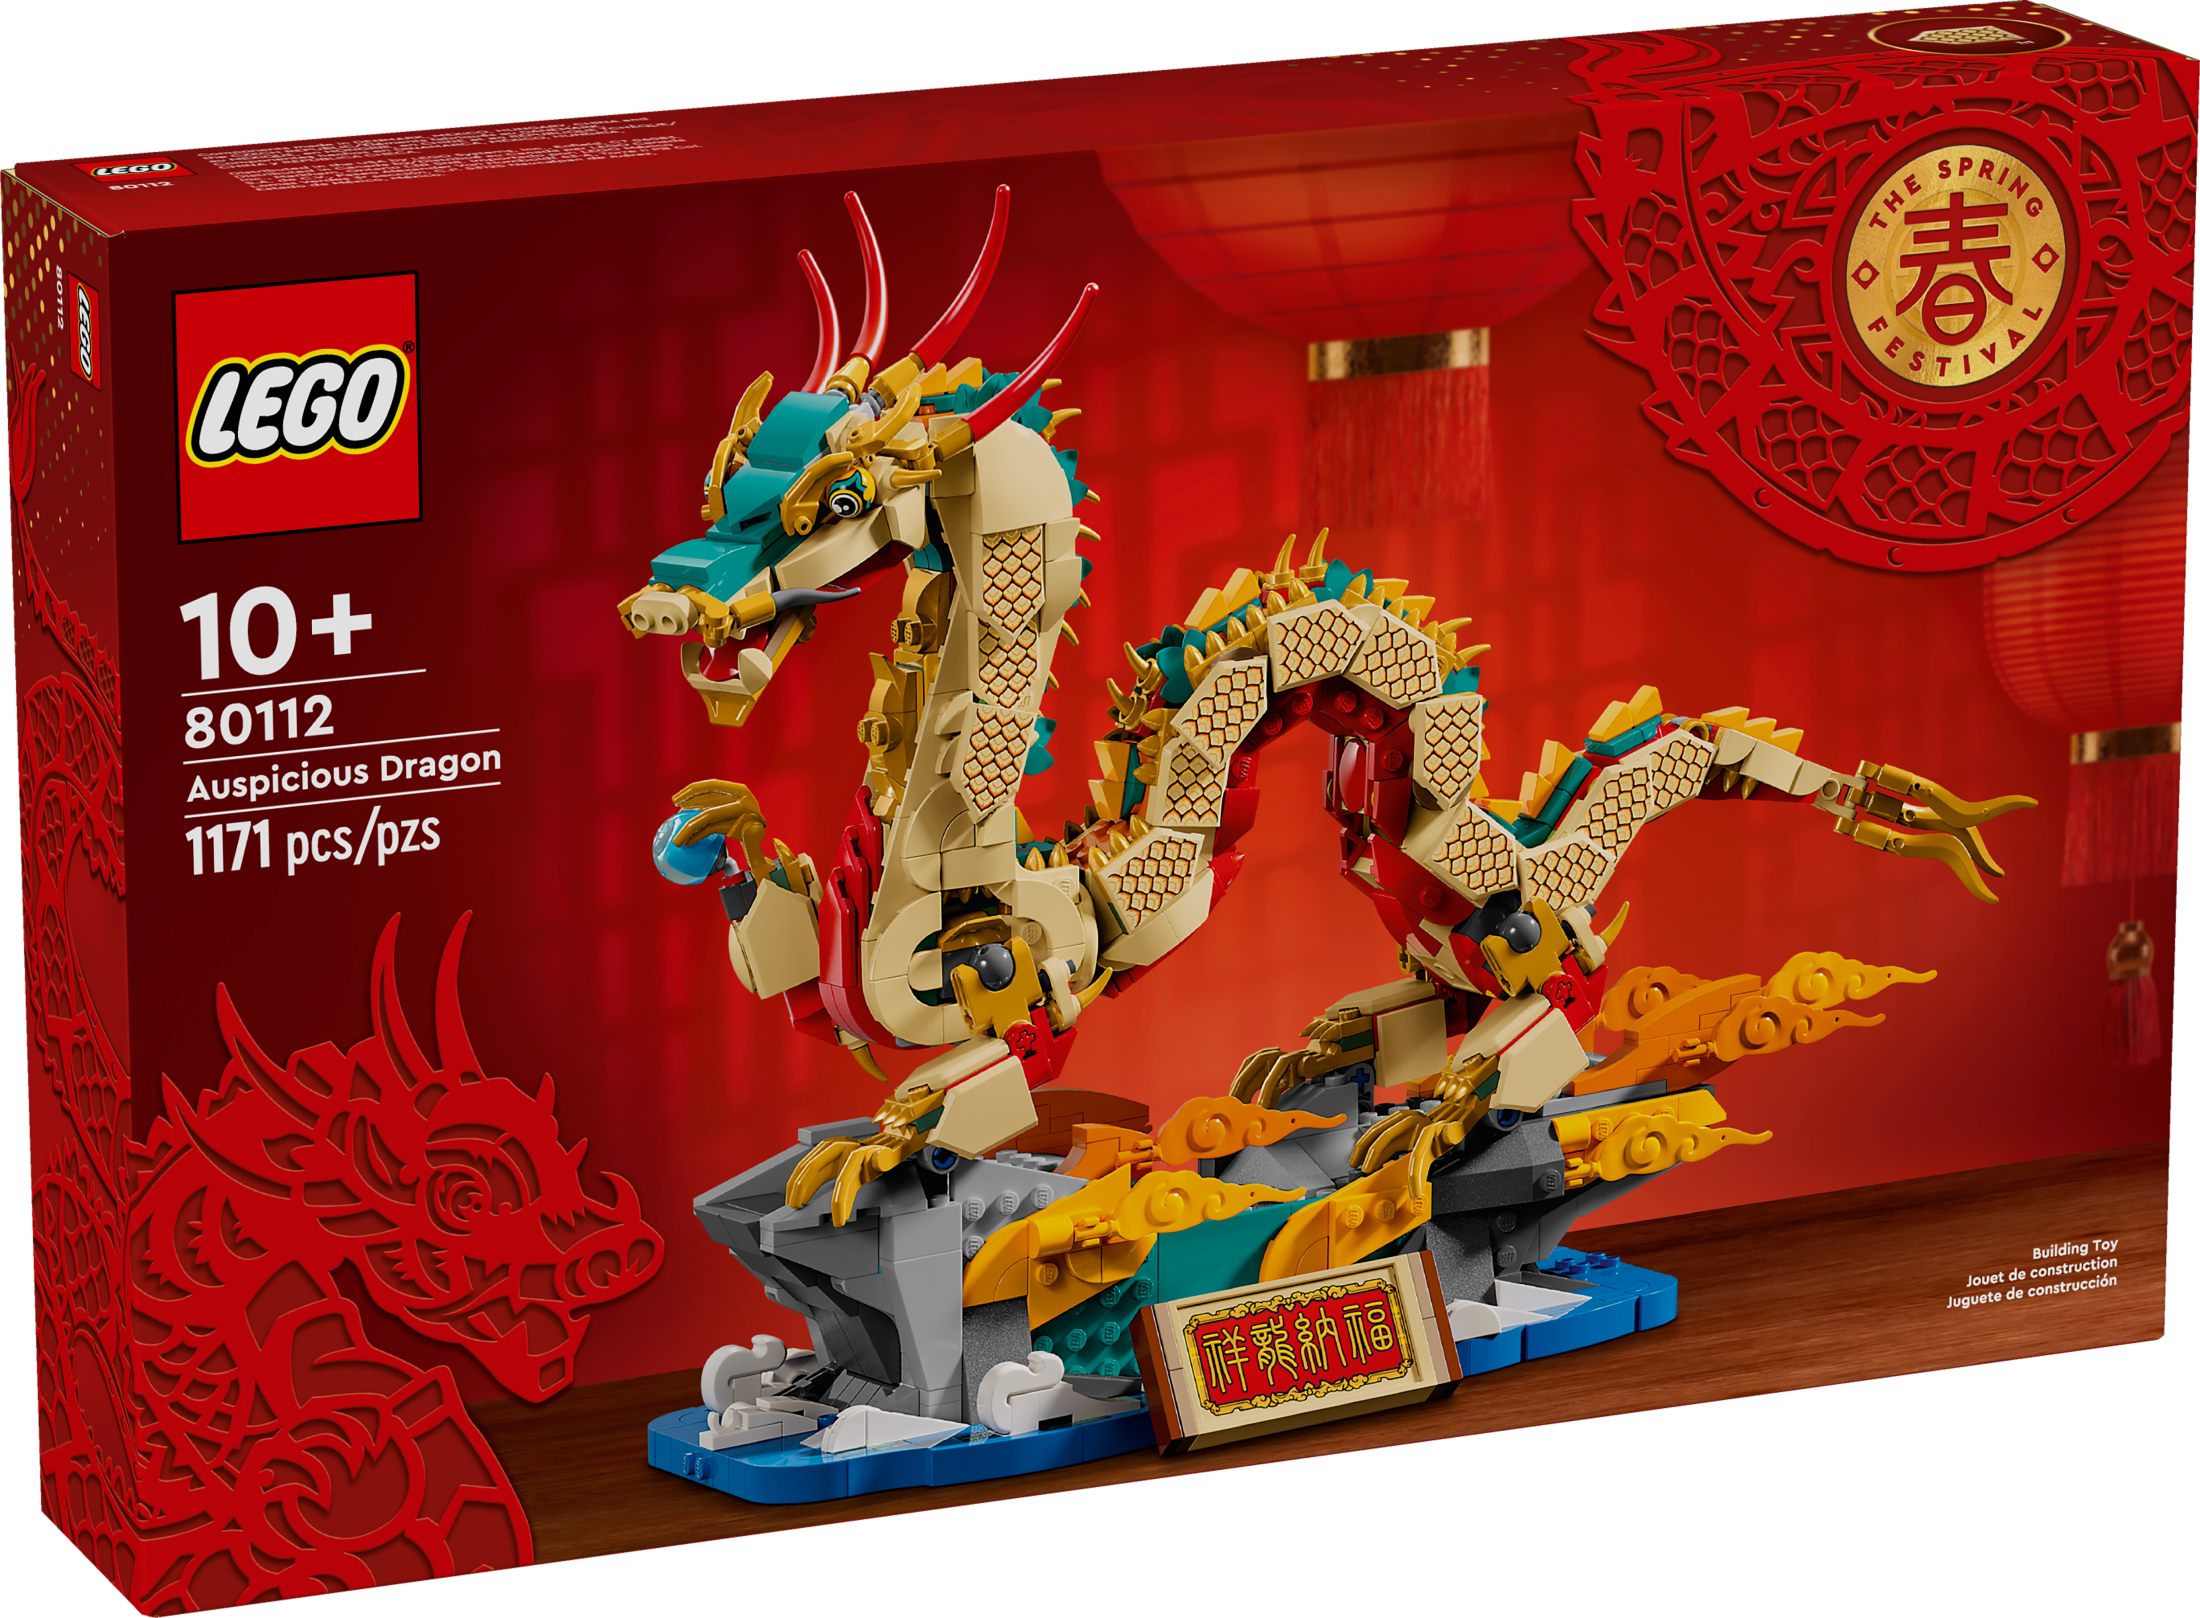 LEGO Spring Festival Auspicious Dragon Buildable Figure, Educational Toy for Kids, Dragon Toy Building Set, Great Spring Festival Decoration or Unique Gift for Boys and Girls Ages 10 and Up, 80112 - image 3 of 9